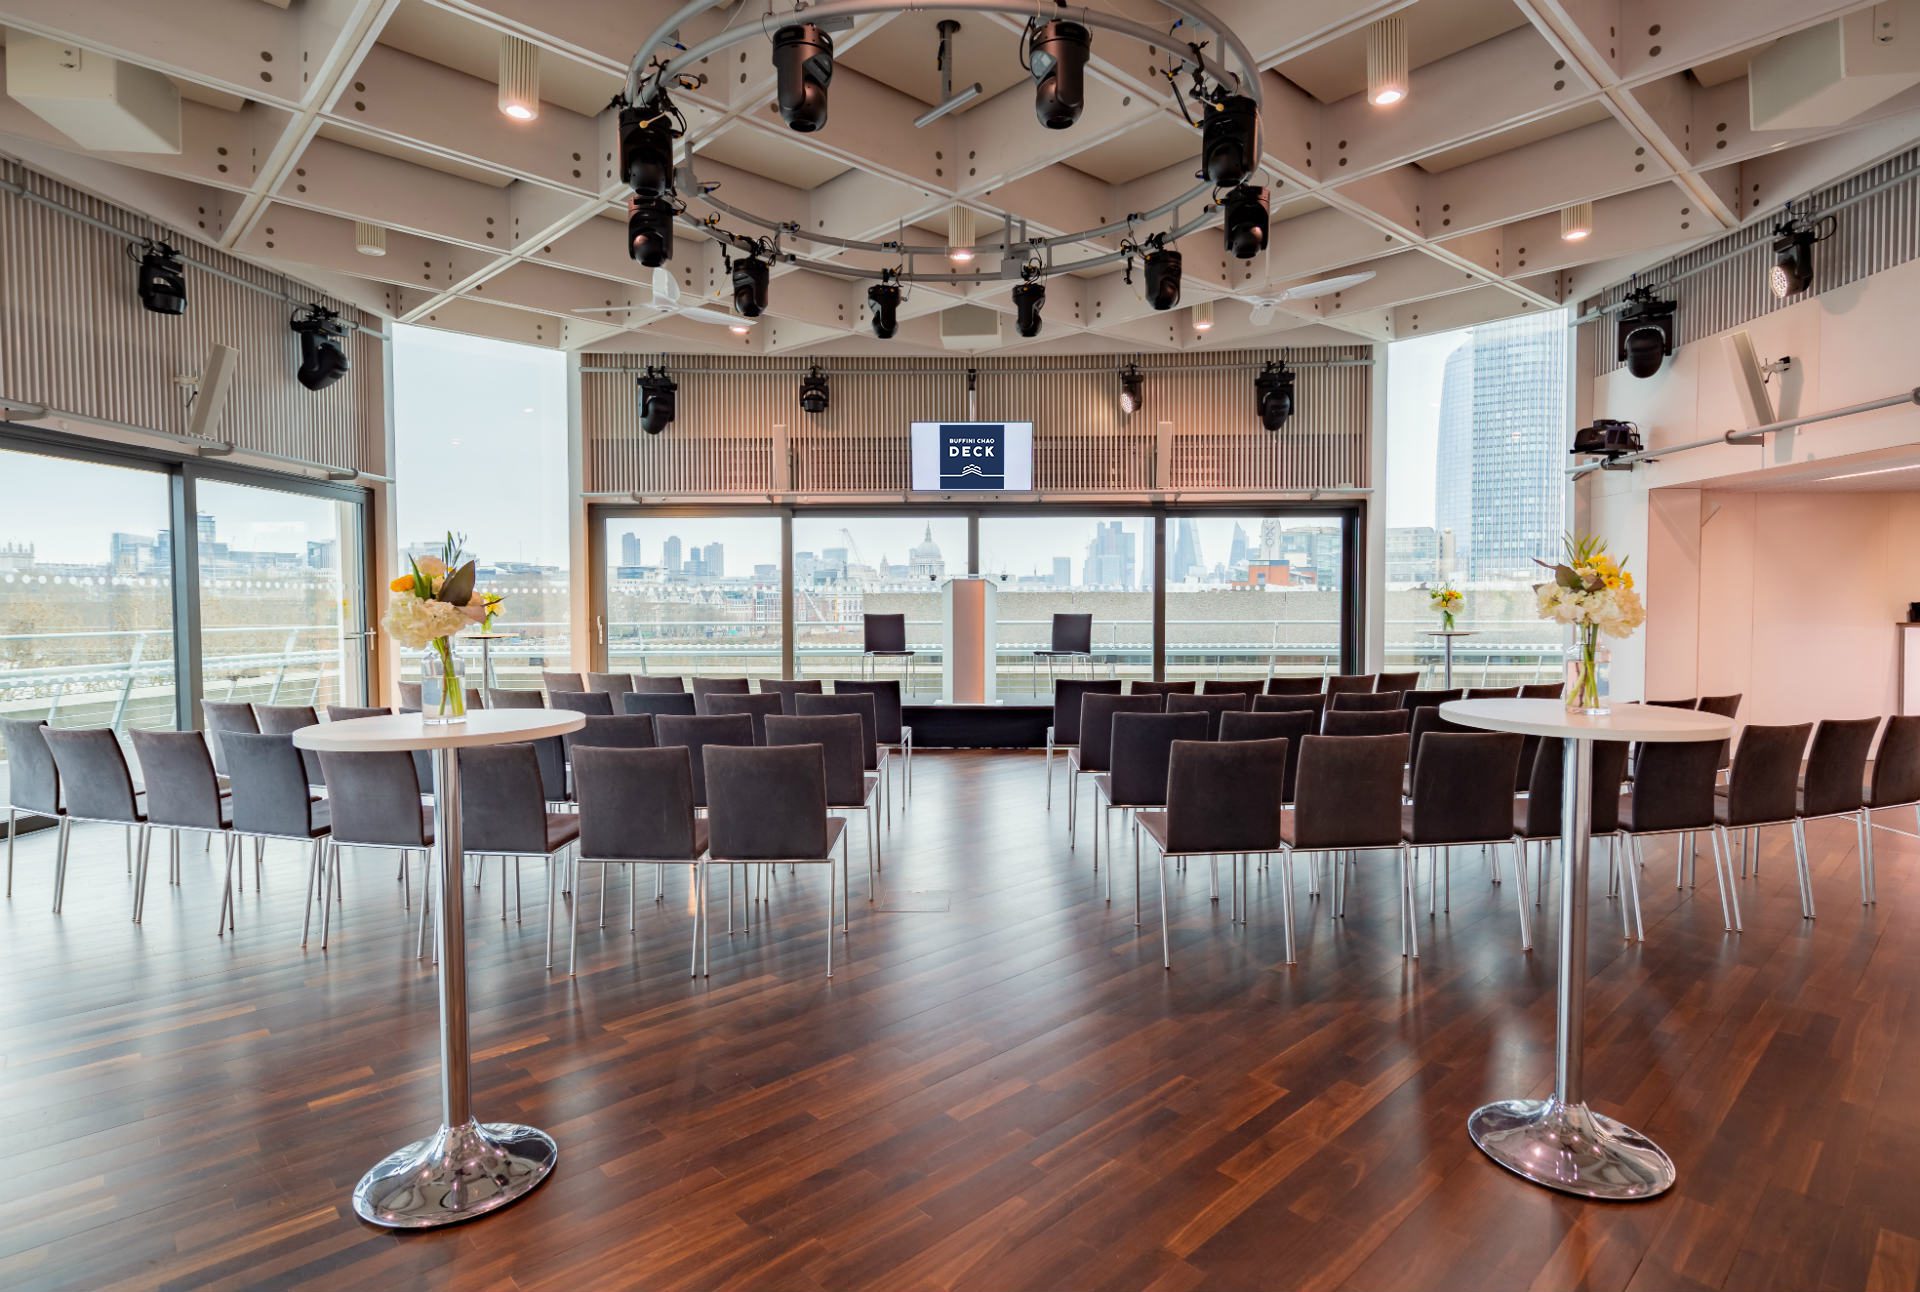 The Buffini Chao Deck: Conference setting